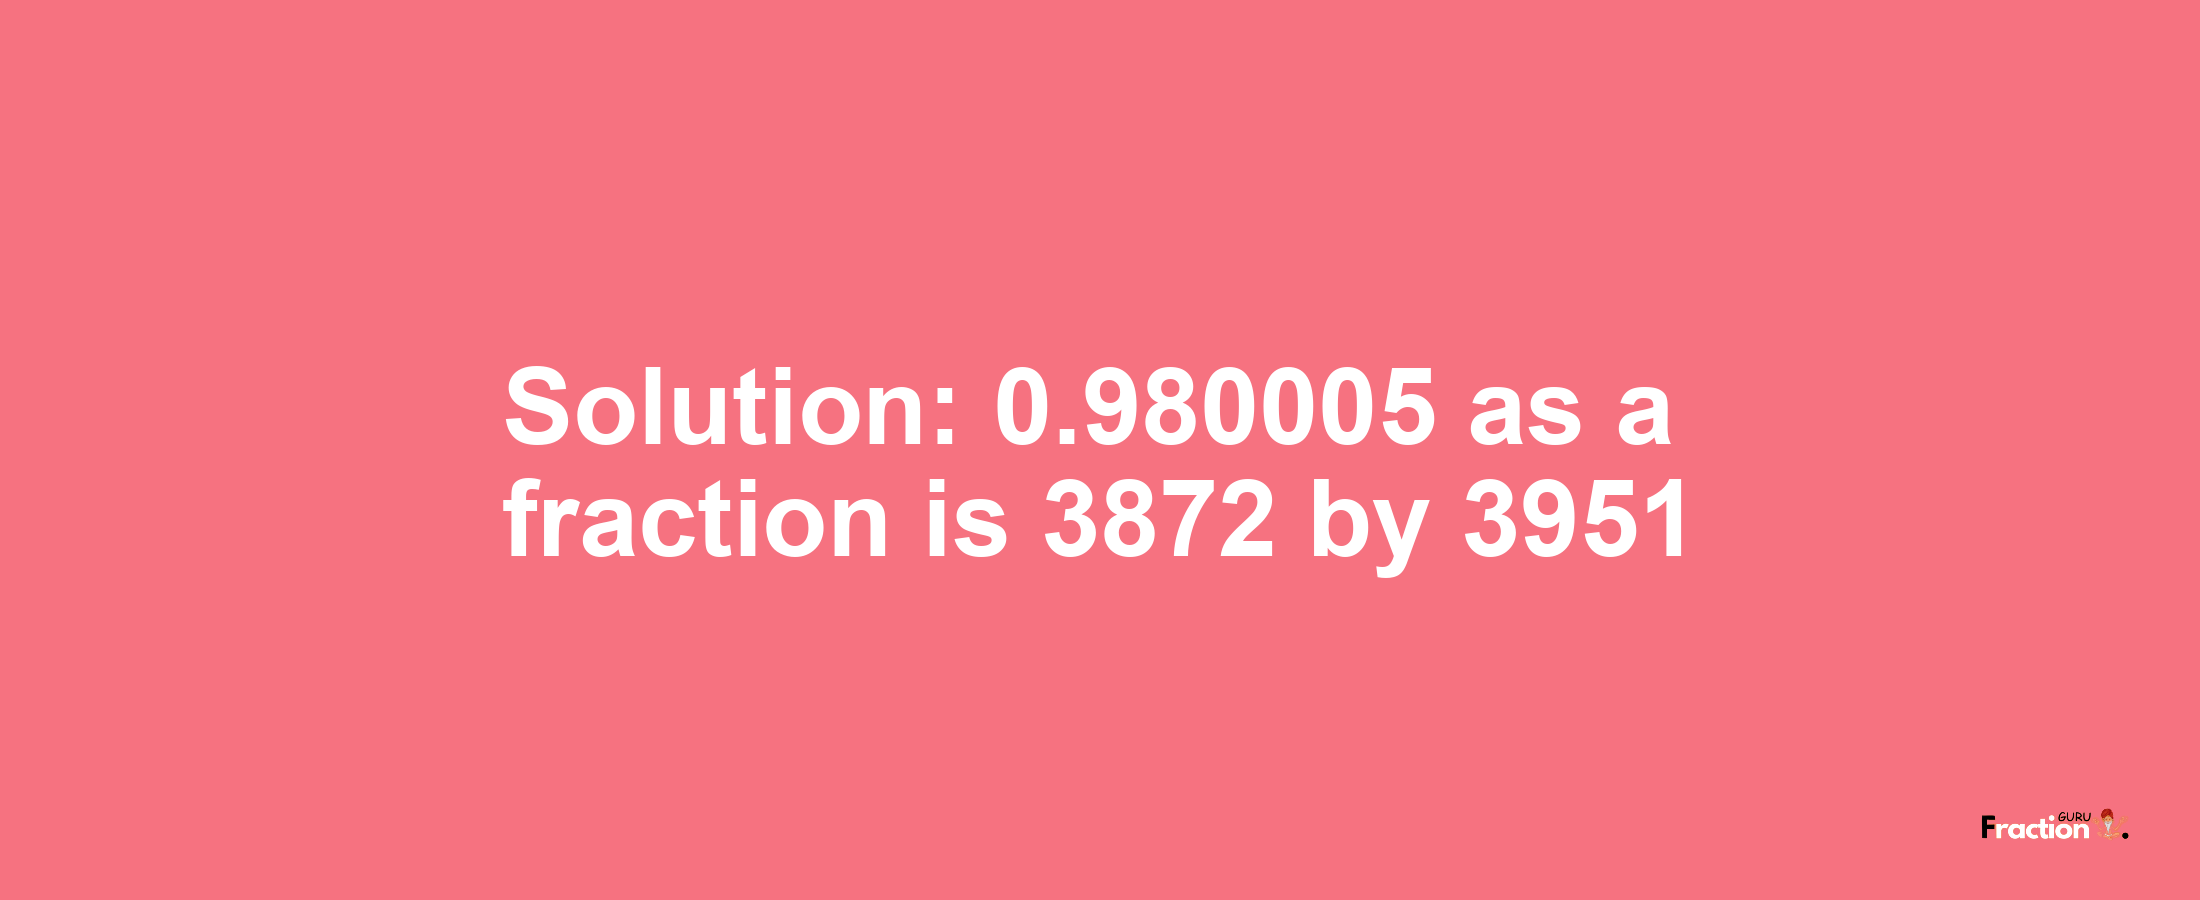 Solution:0.980005 as a fraction is 3872/3951